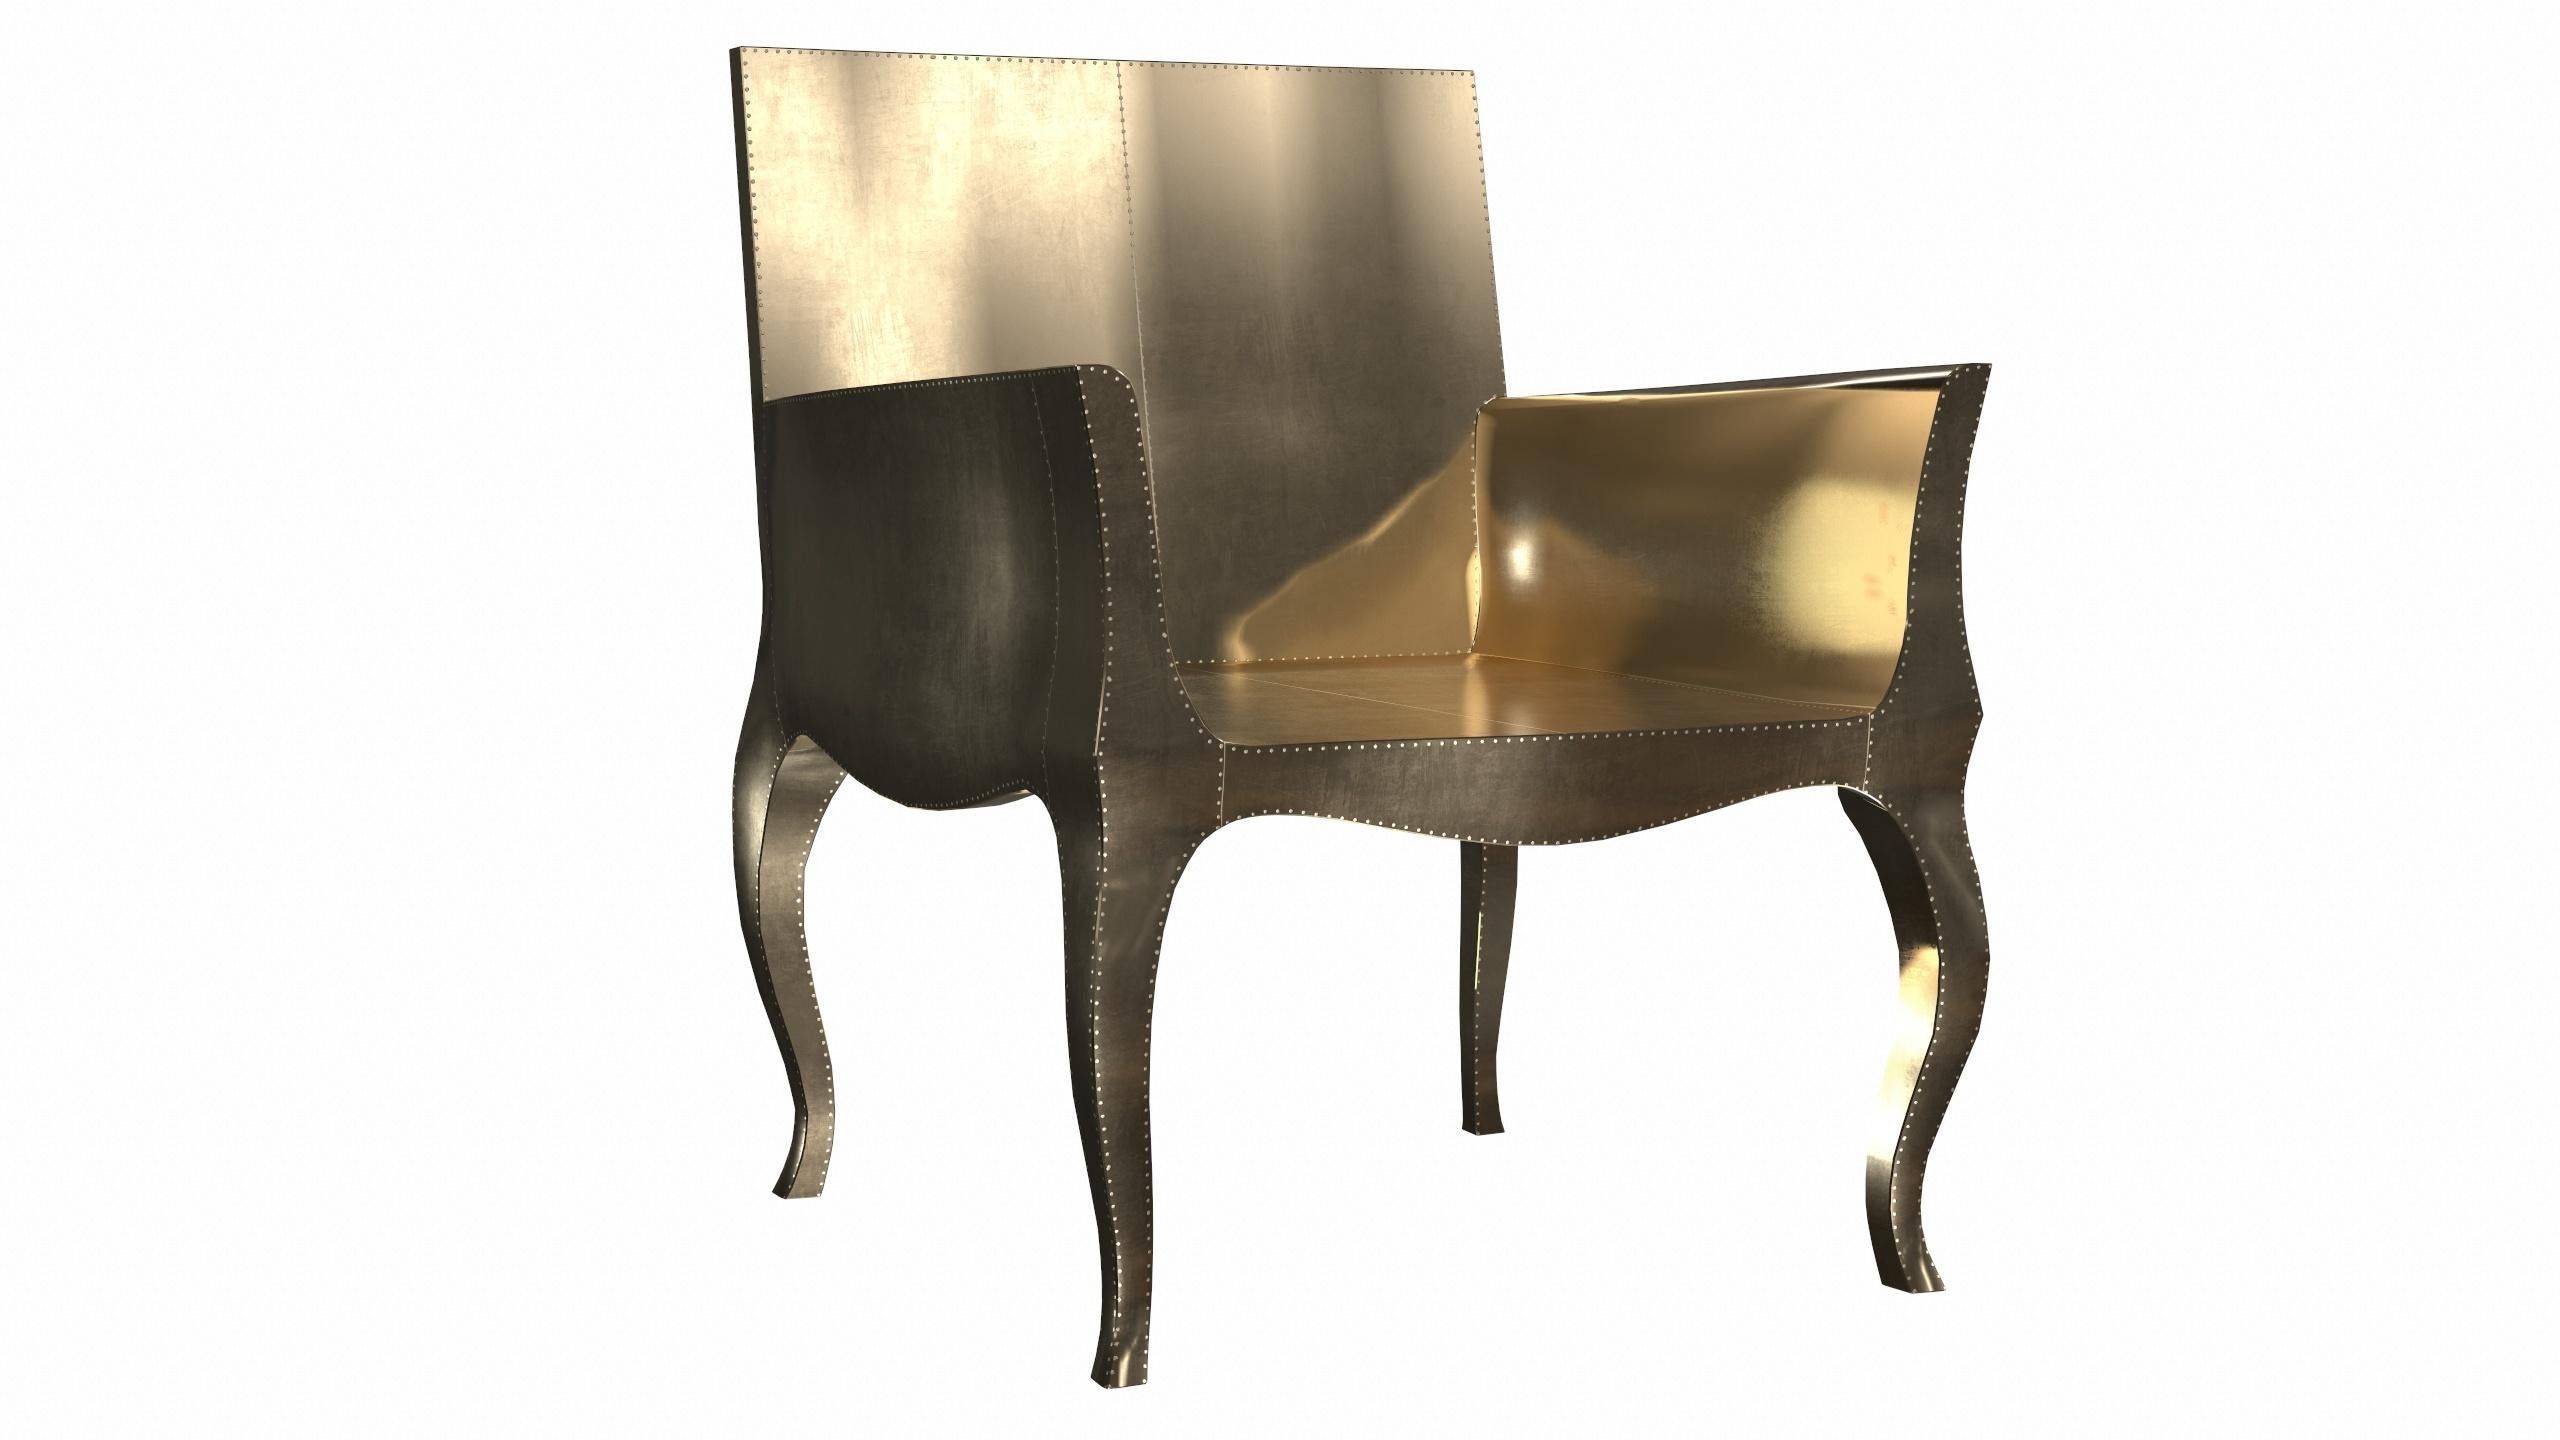 Antique Art Deco Chairs Smooth Brass by Paul Mathieu for S. Odegard In New Condition For Sale In New York, NY